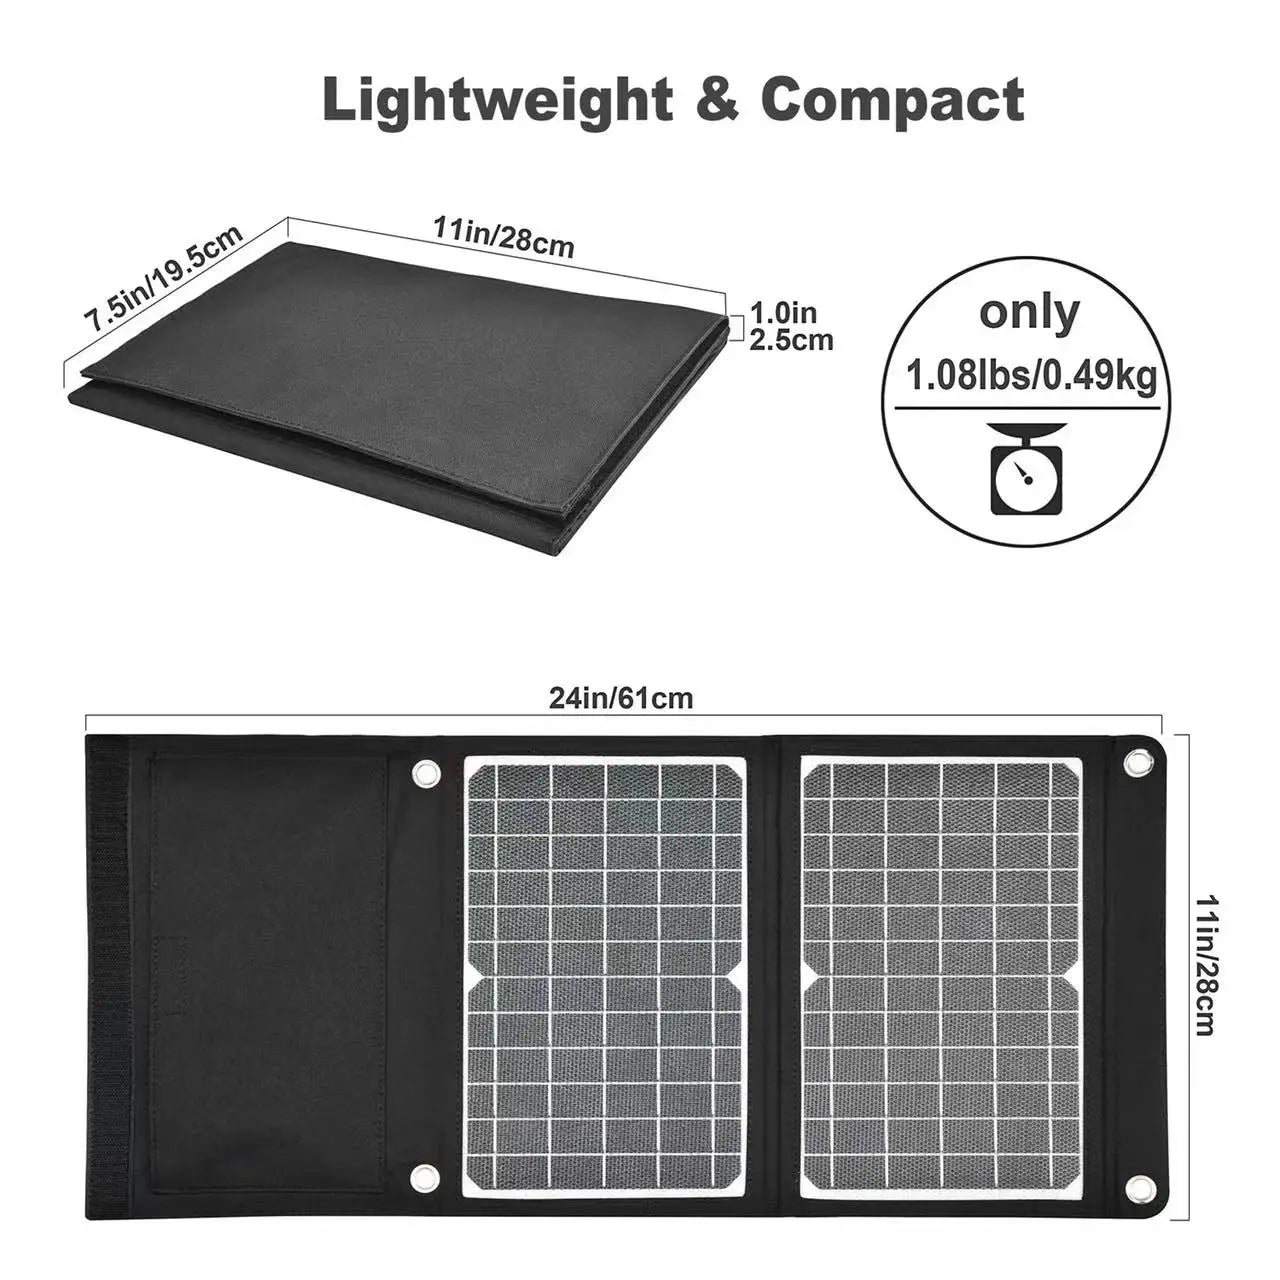 EFTE Solar Panel, Compact and lightweight device measures 2.5cm thick and weighs 0.49kg, perfect for carrying.